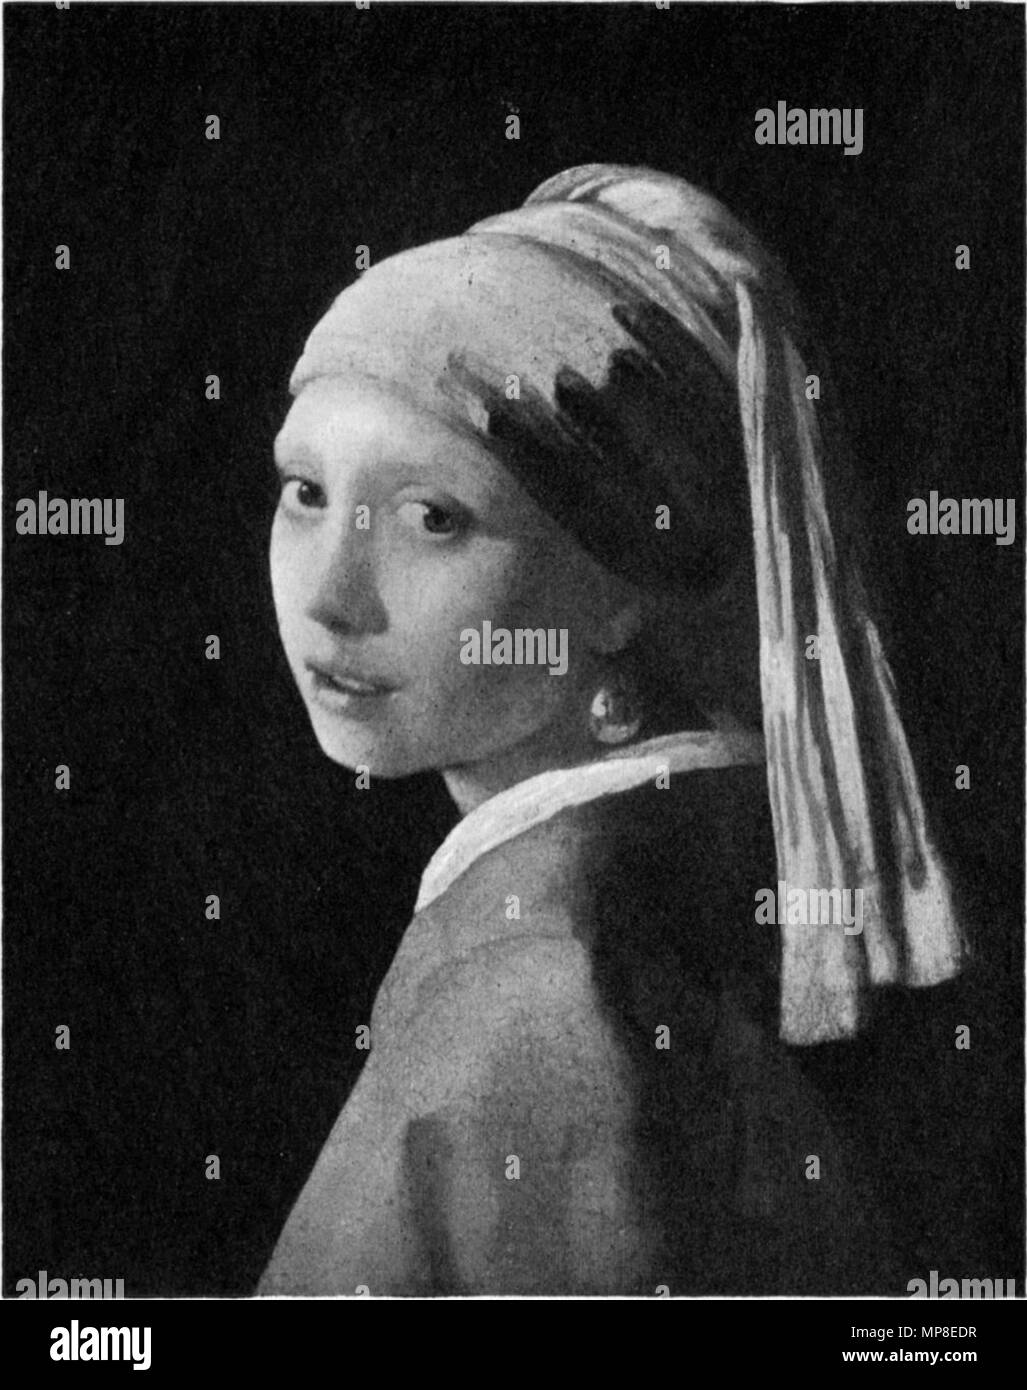 The Girl with a Pearl Earring. Alternative title(s): Head of a girl [old title].[1]  circa 1665 (1660-1670).   730 Johannes Vermeer 007 black and white 01 Stock Photo